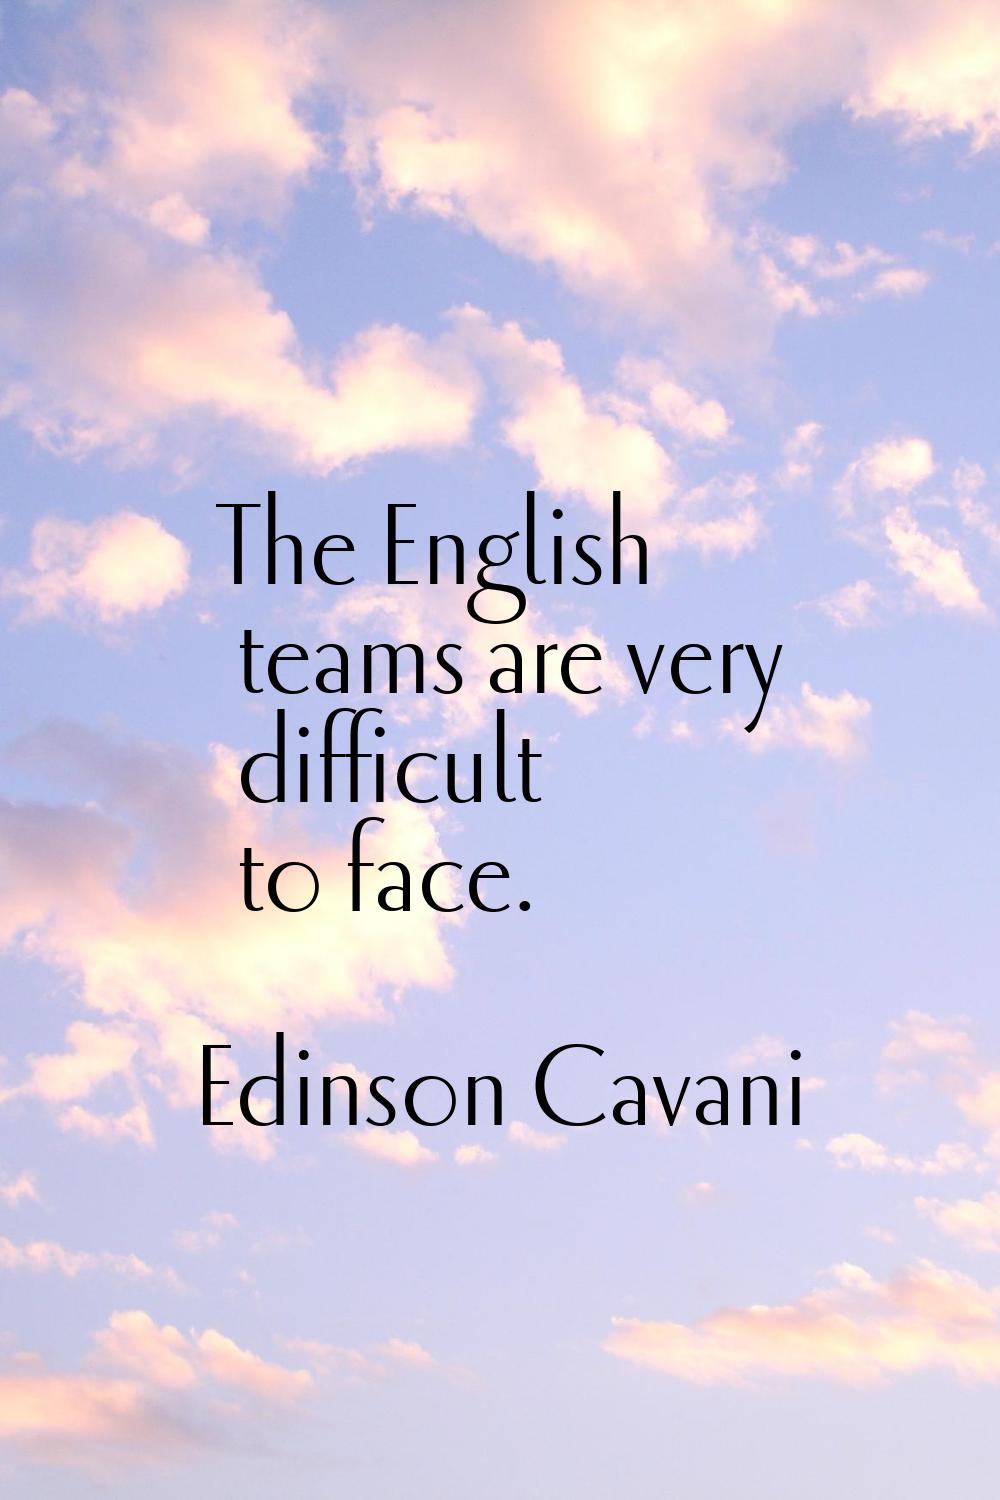 The English teams are very difficult to face.